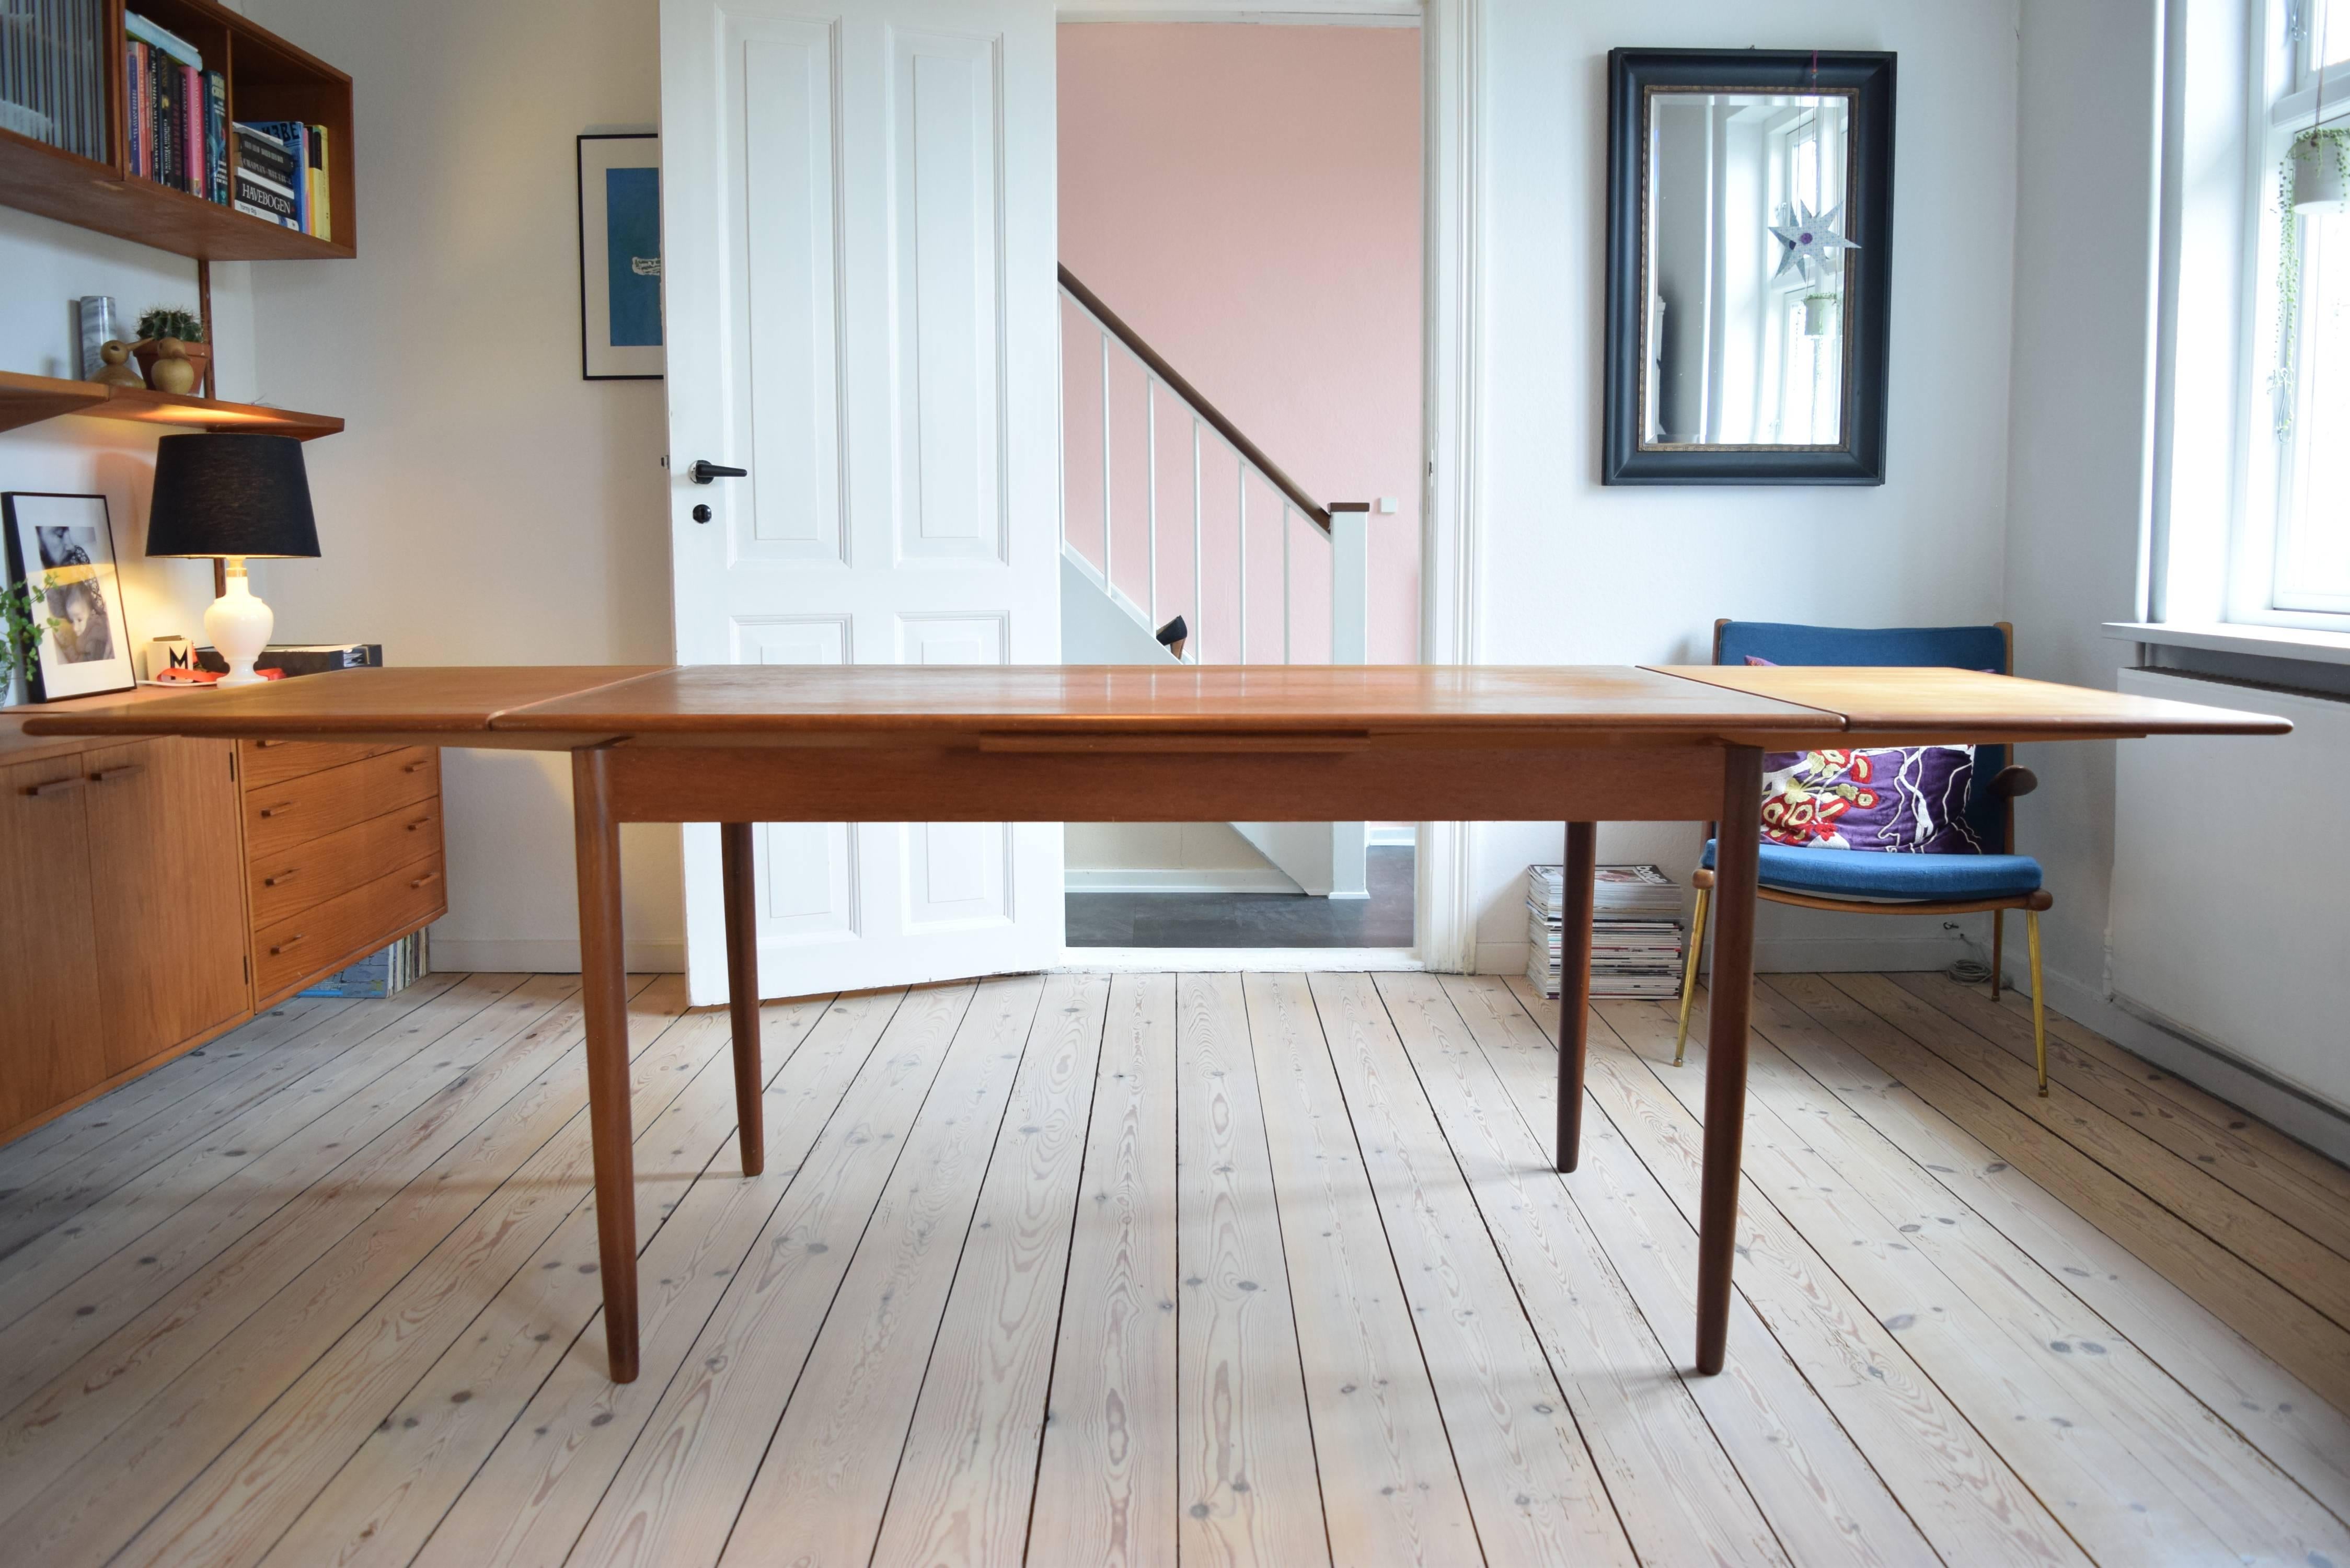 Teak dining table manufactured in Denmark in the 1960s. Features two hidden plates which when used extends the table to 240cm in length. Solid teak bevelled edge. Structurally sound with few marks and no damage.